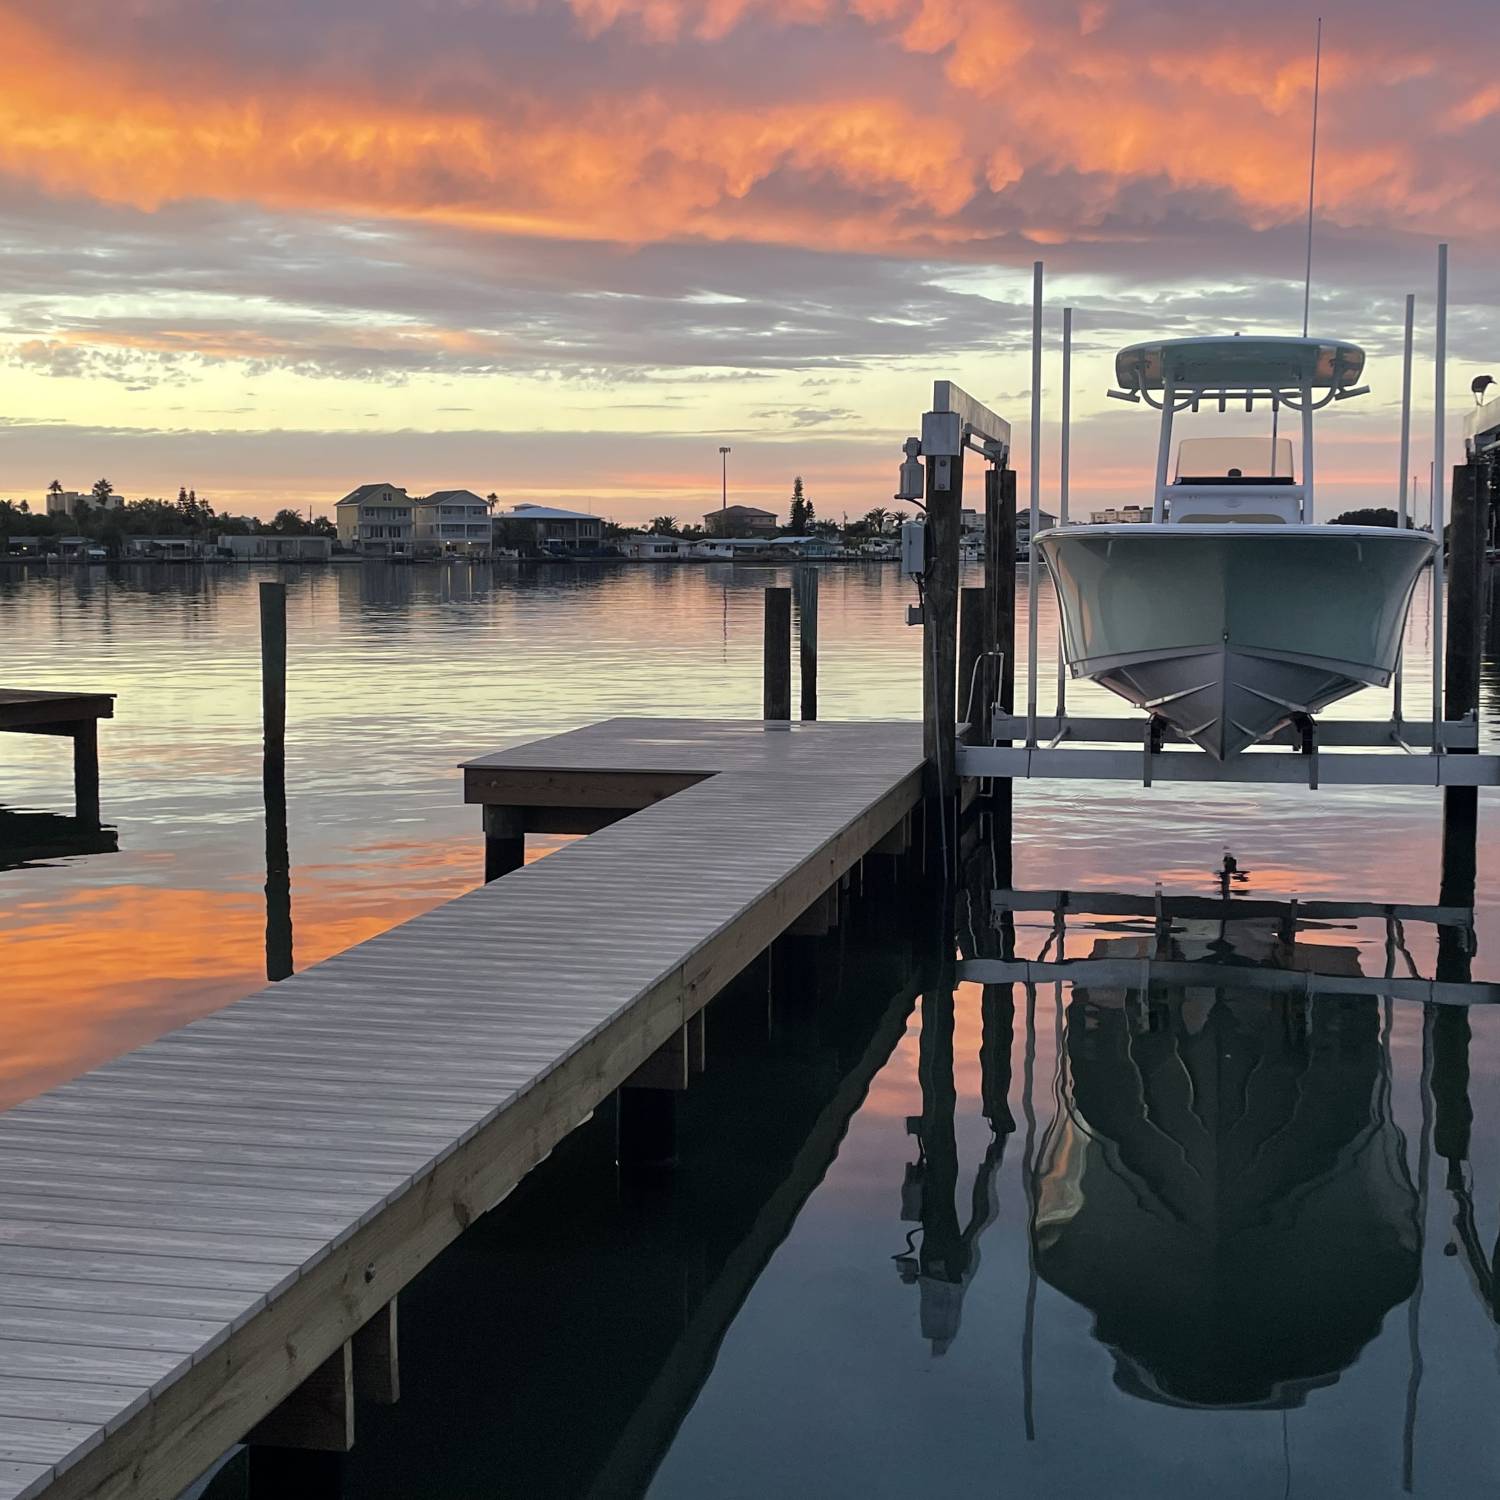 Title: She’s finally home - On board their Sportsman Open 242 Center Console - Location: Madeira beach. Participating in the Photo Contest #SportsmanOctober